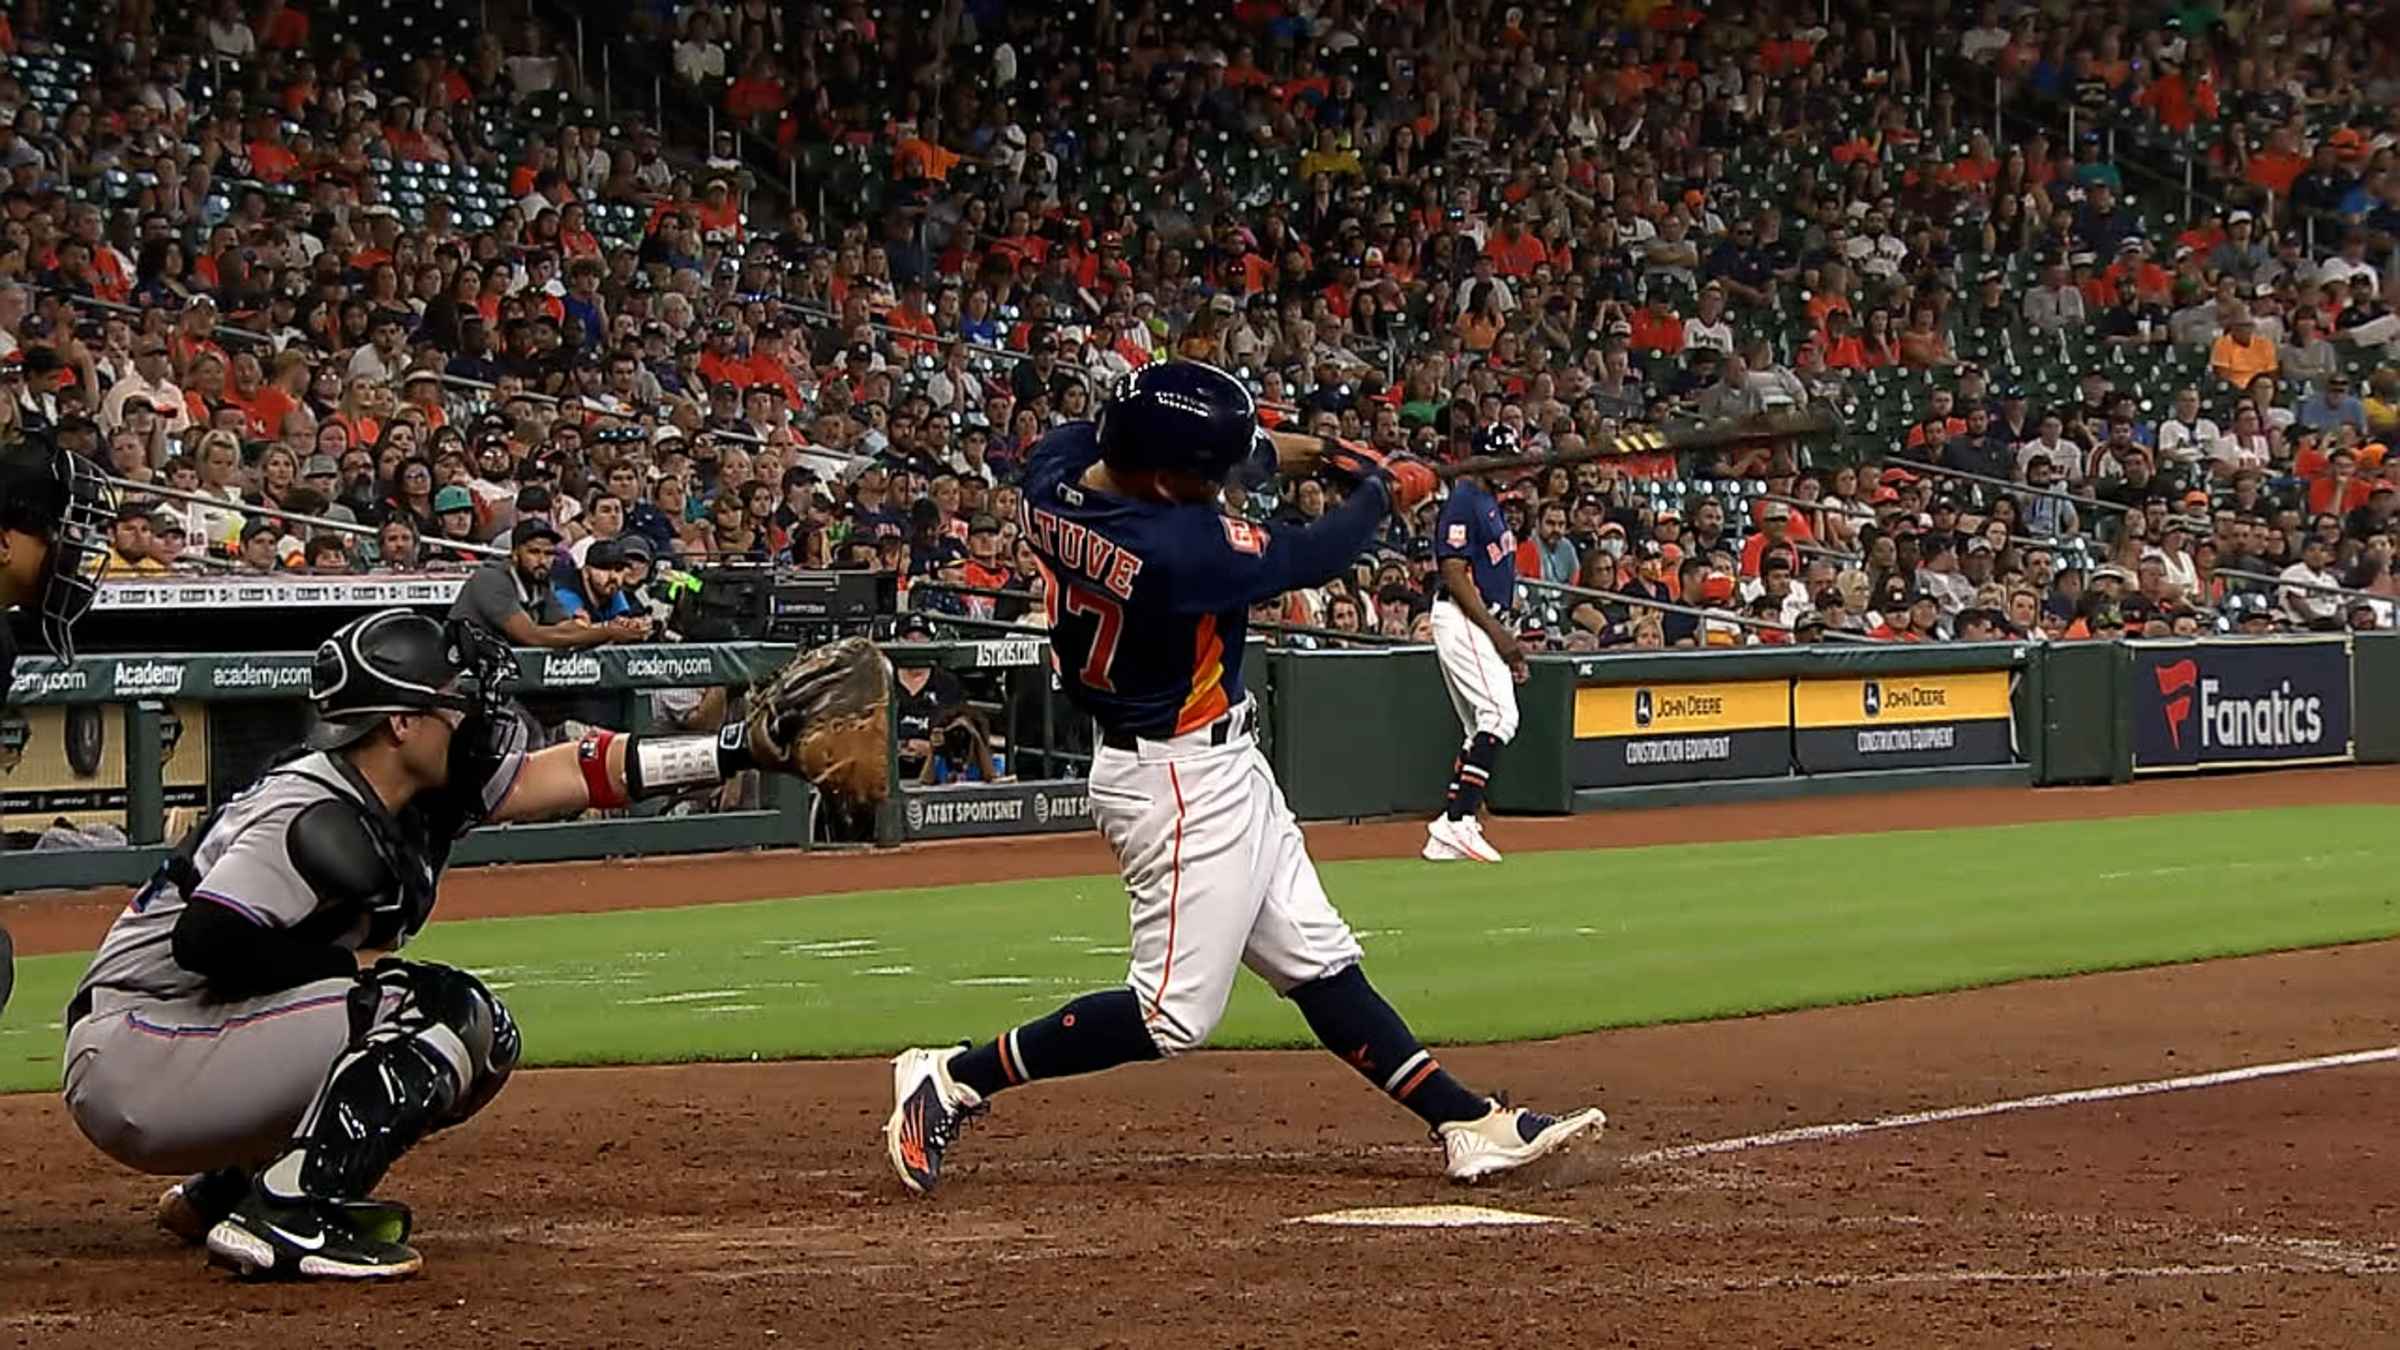 Jose Altuve hits a 2 run homer in the bottom of - so fresh and